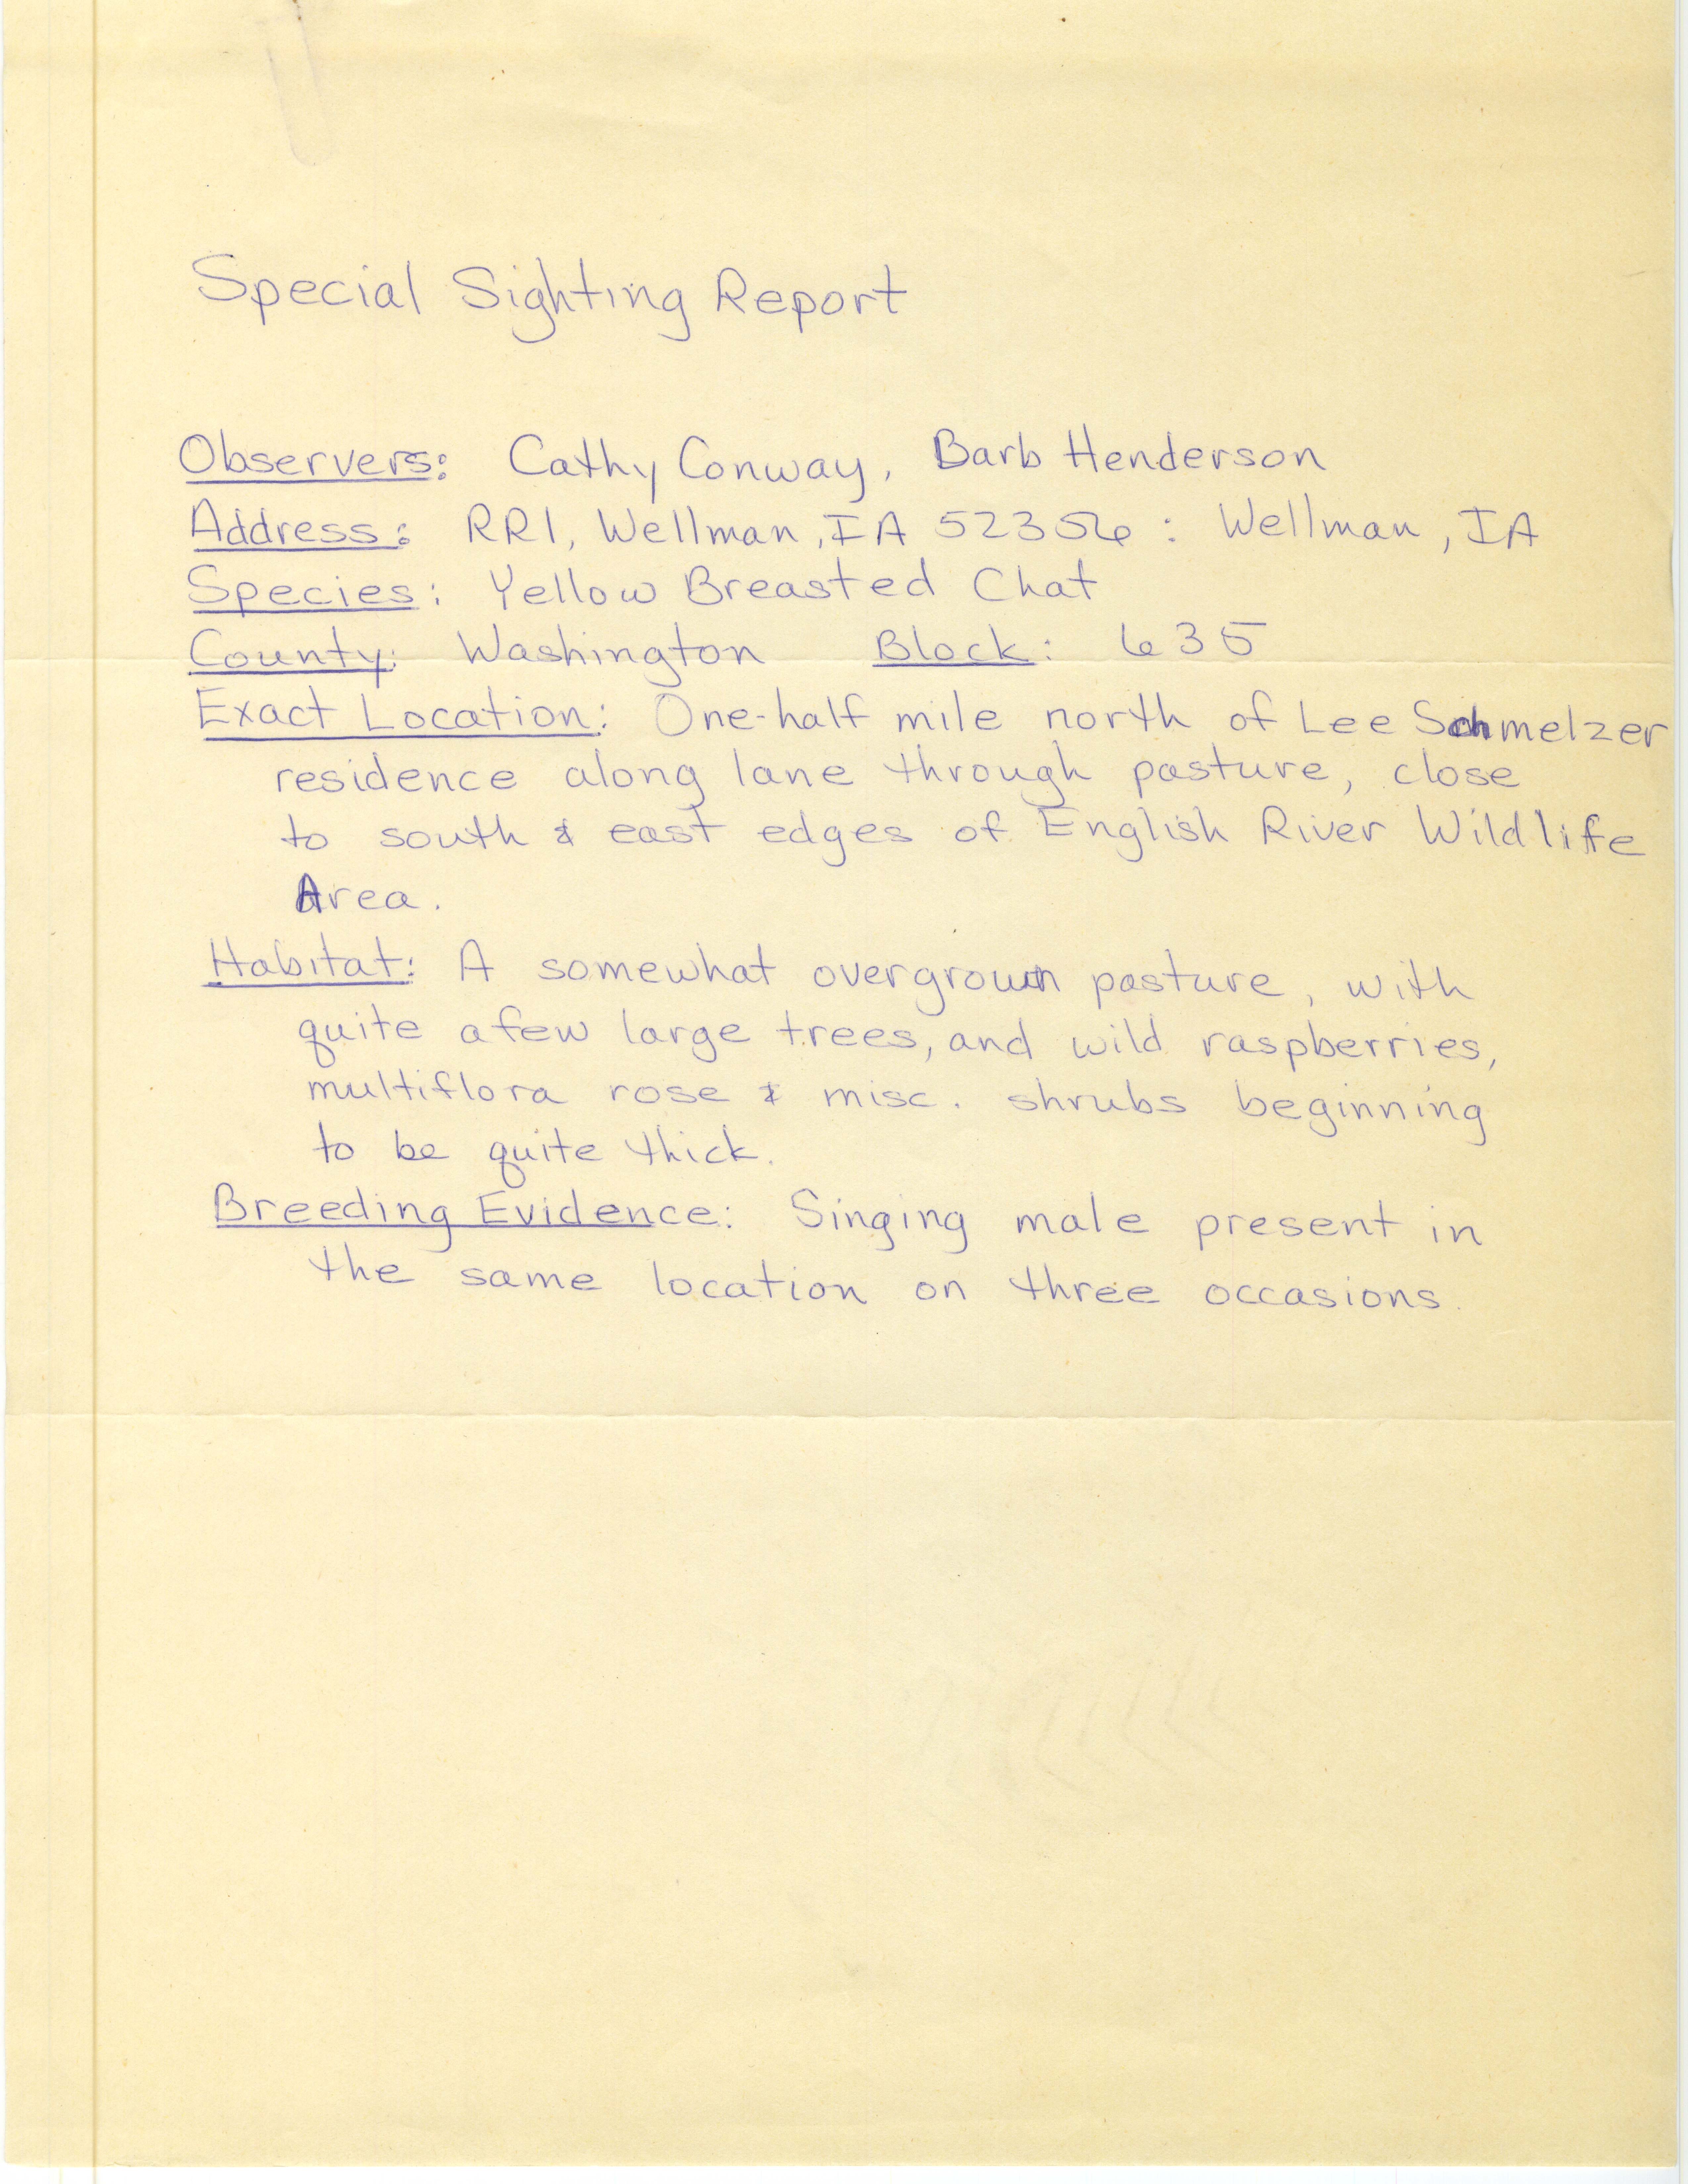 Special sighting report, Cathy C. Conway and Barbara Henderson, summer 1987